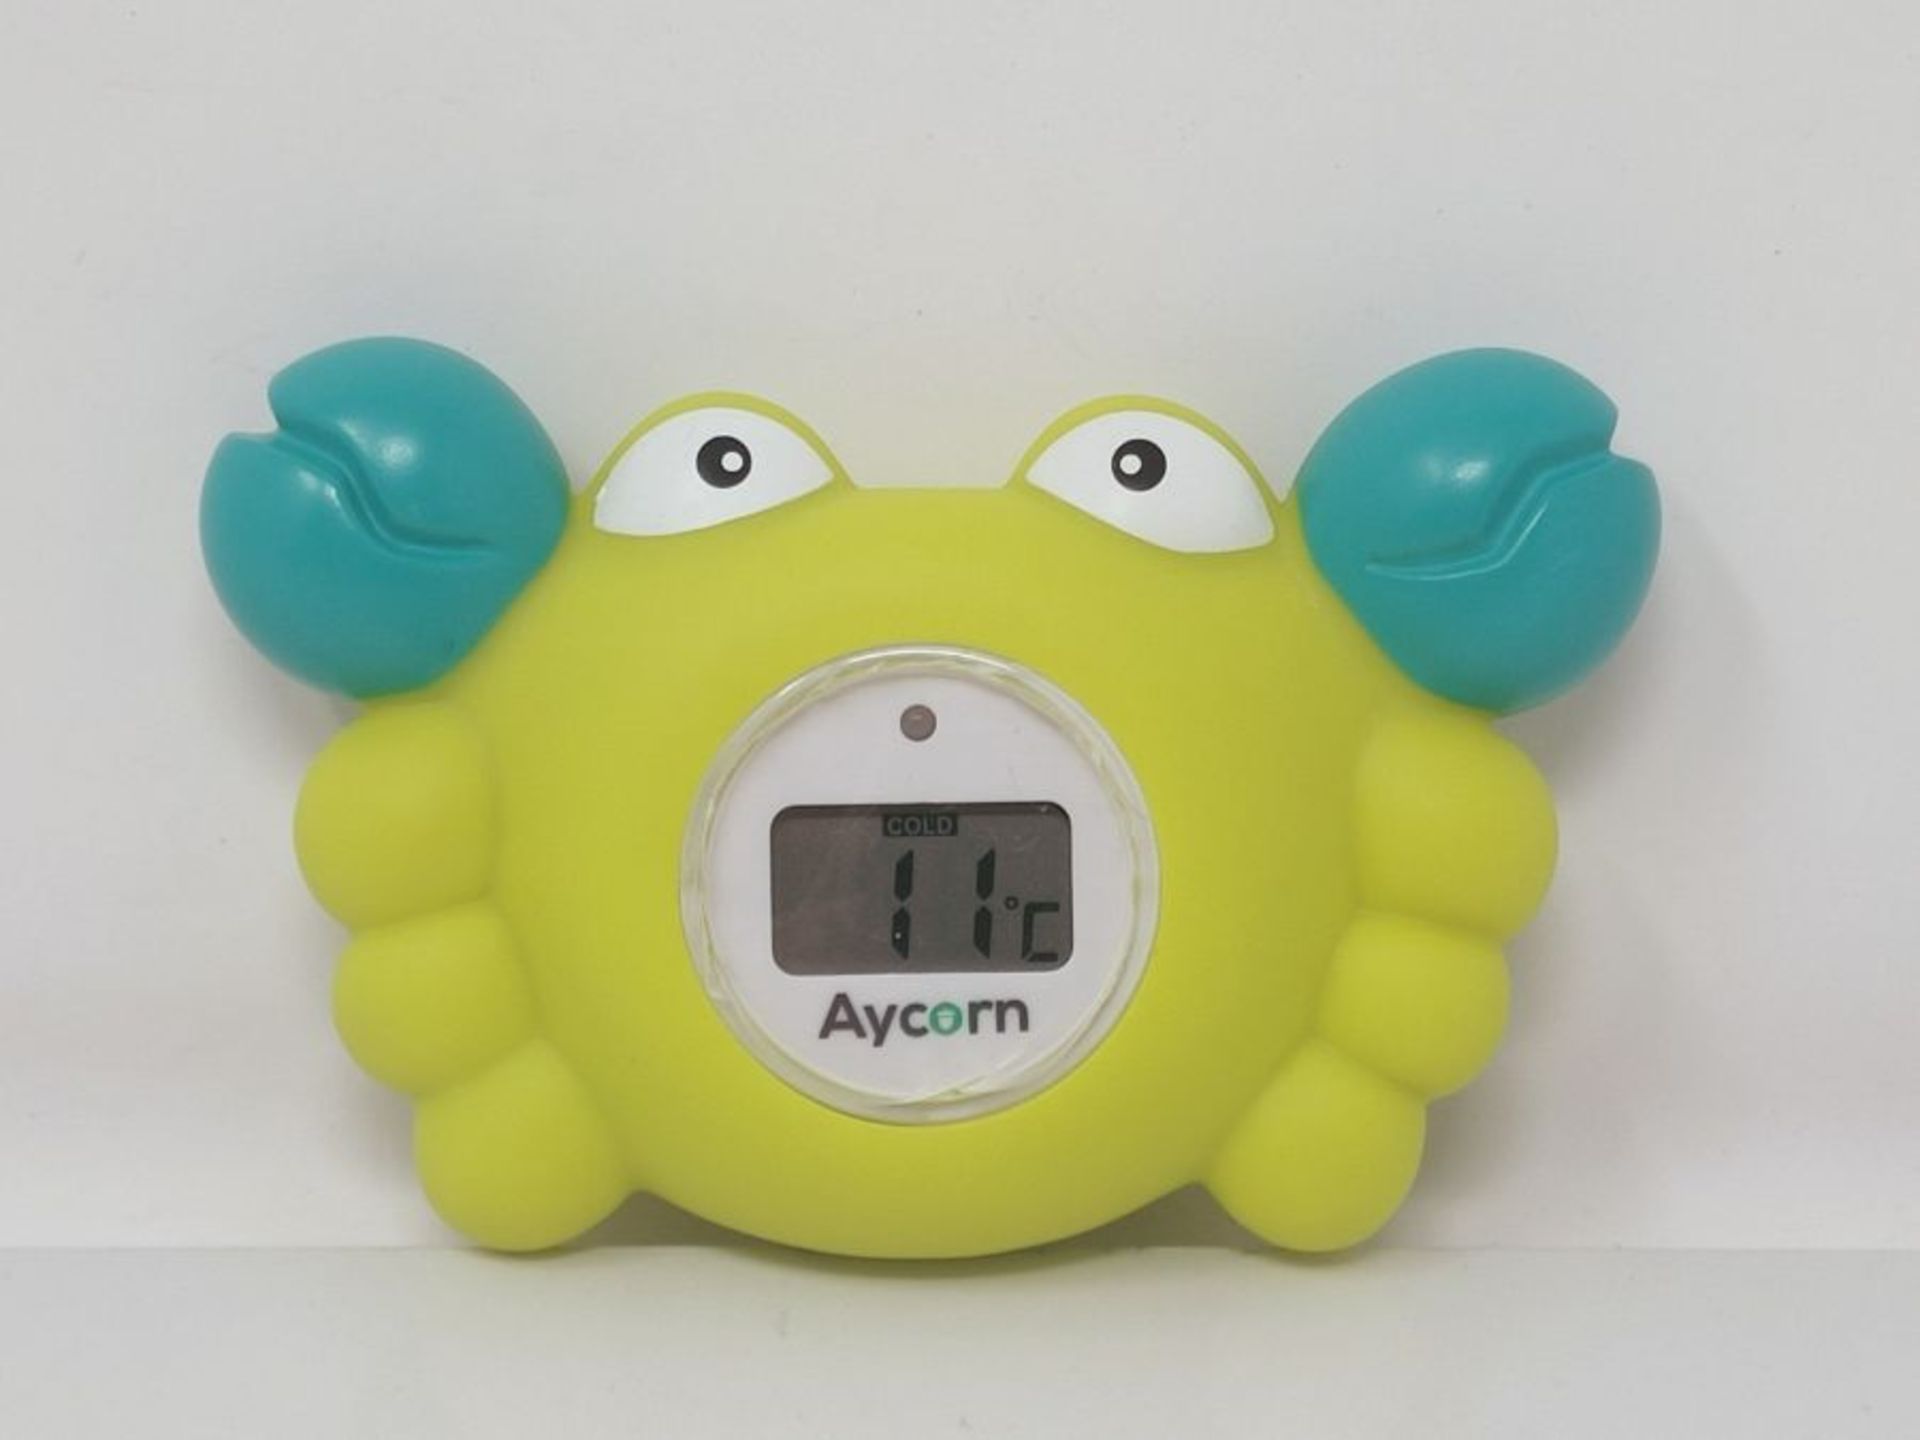 Aycorn Digital Baby Bath and Room Thermometer. Fast and Accurate Water Readings with L - Image 2 of 3